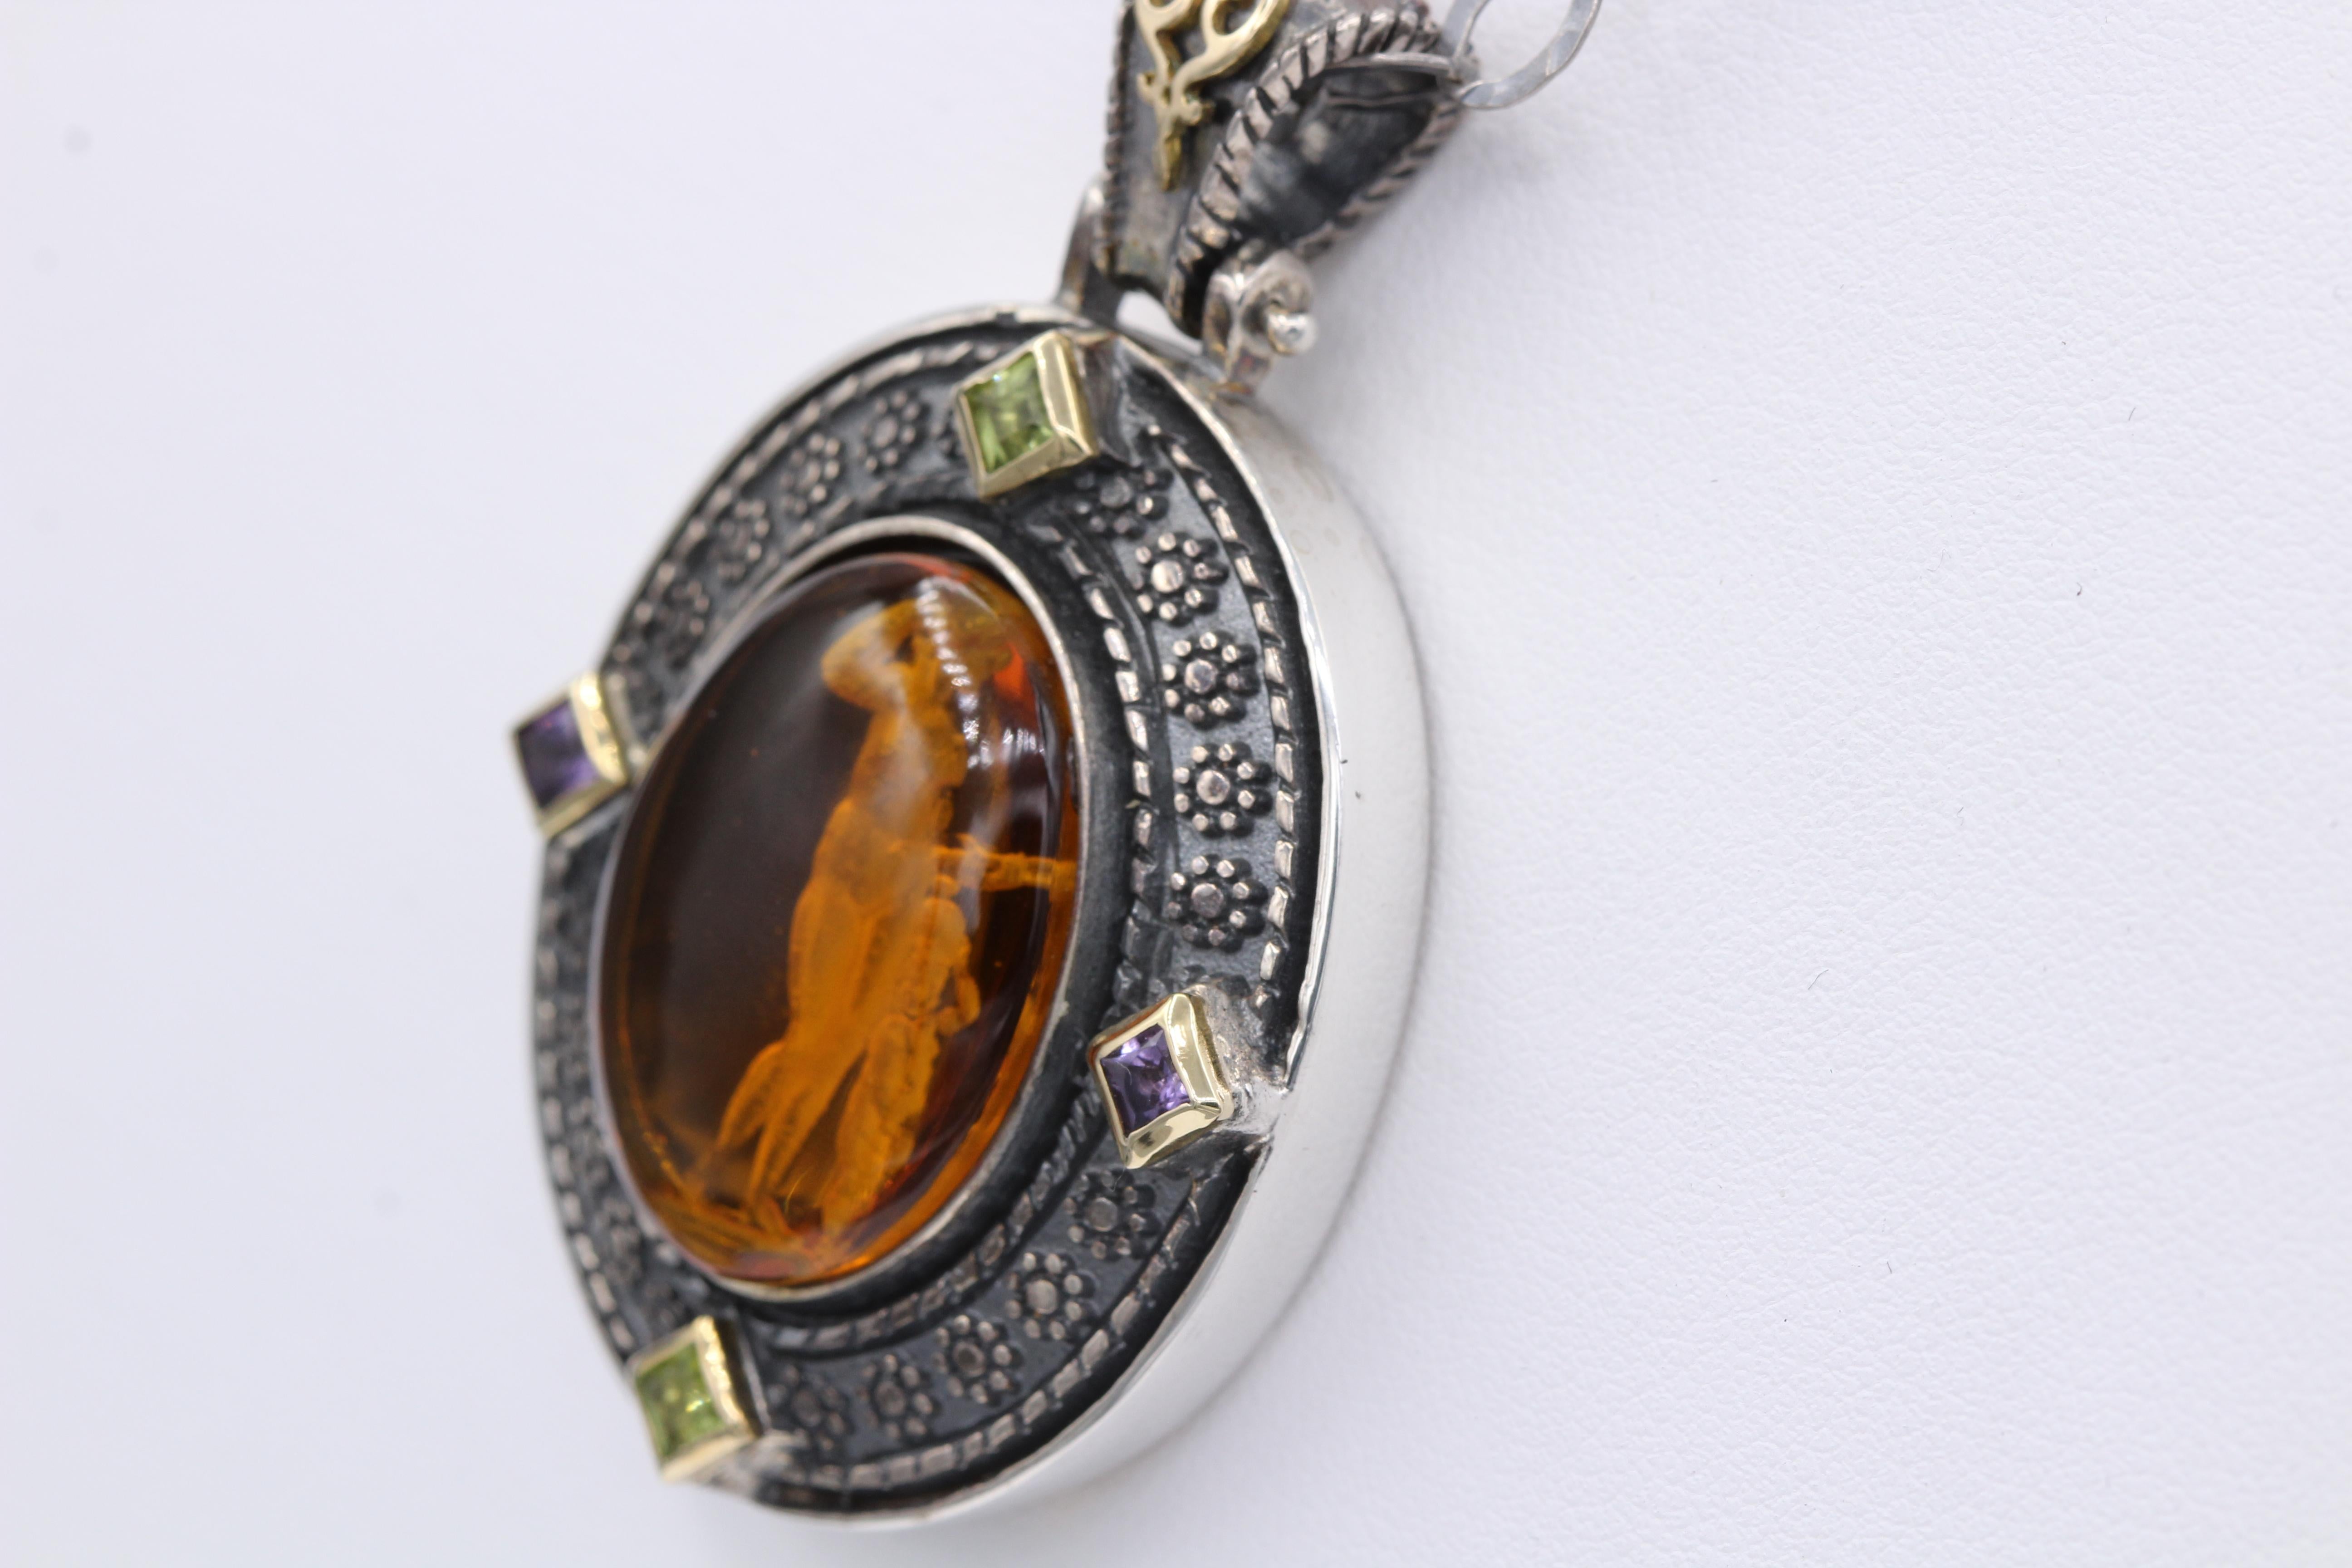 Venetian Purple Murano Glass Antique / Gothic Style Pendant
Image of Venus and Cupid - Godess asociated with love, beauty and fertility
Sterling Silver 925, 29.0 Grams, 
with small natural Amethyst & Peridot stones,
set with 18K Yellow Gold